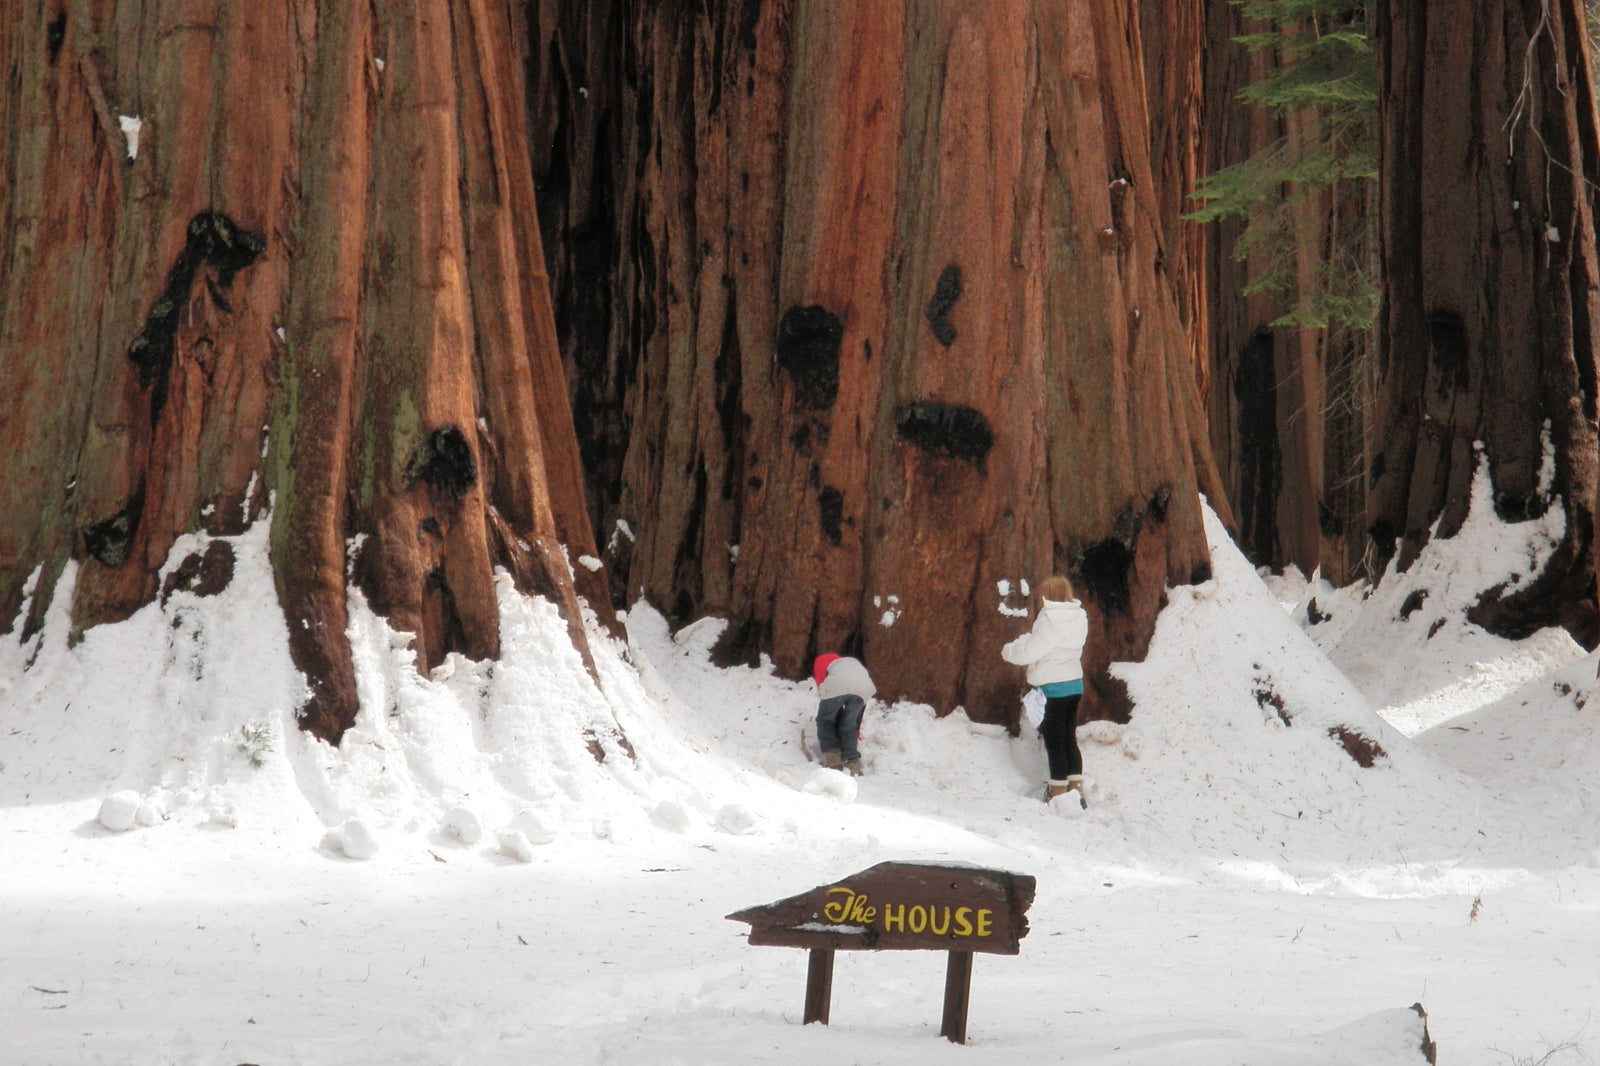 The House Group of Giant Sequoias in winter